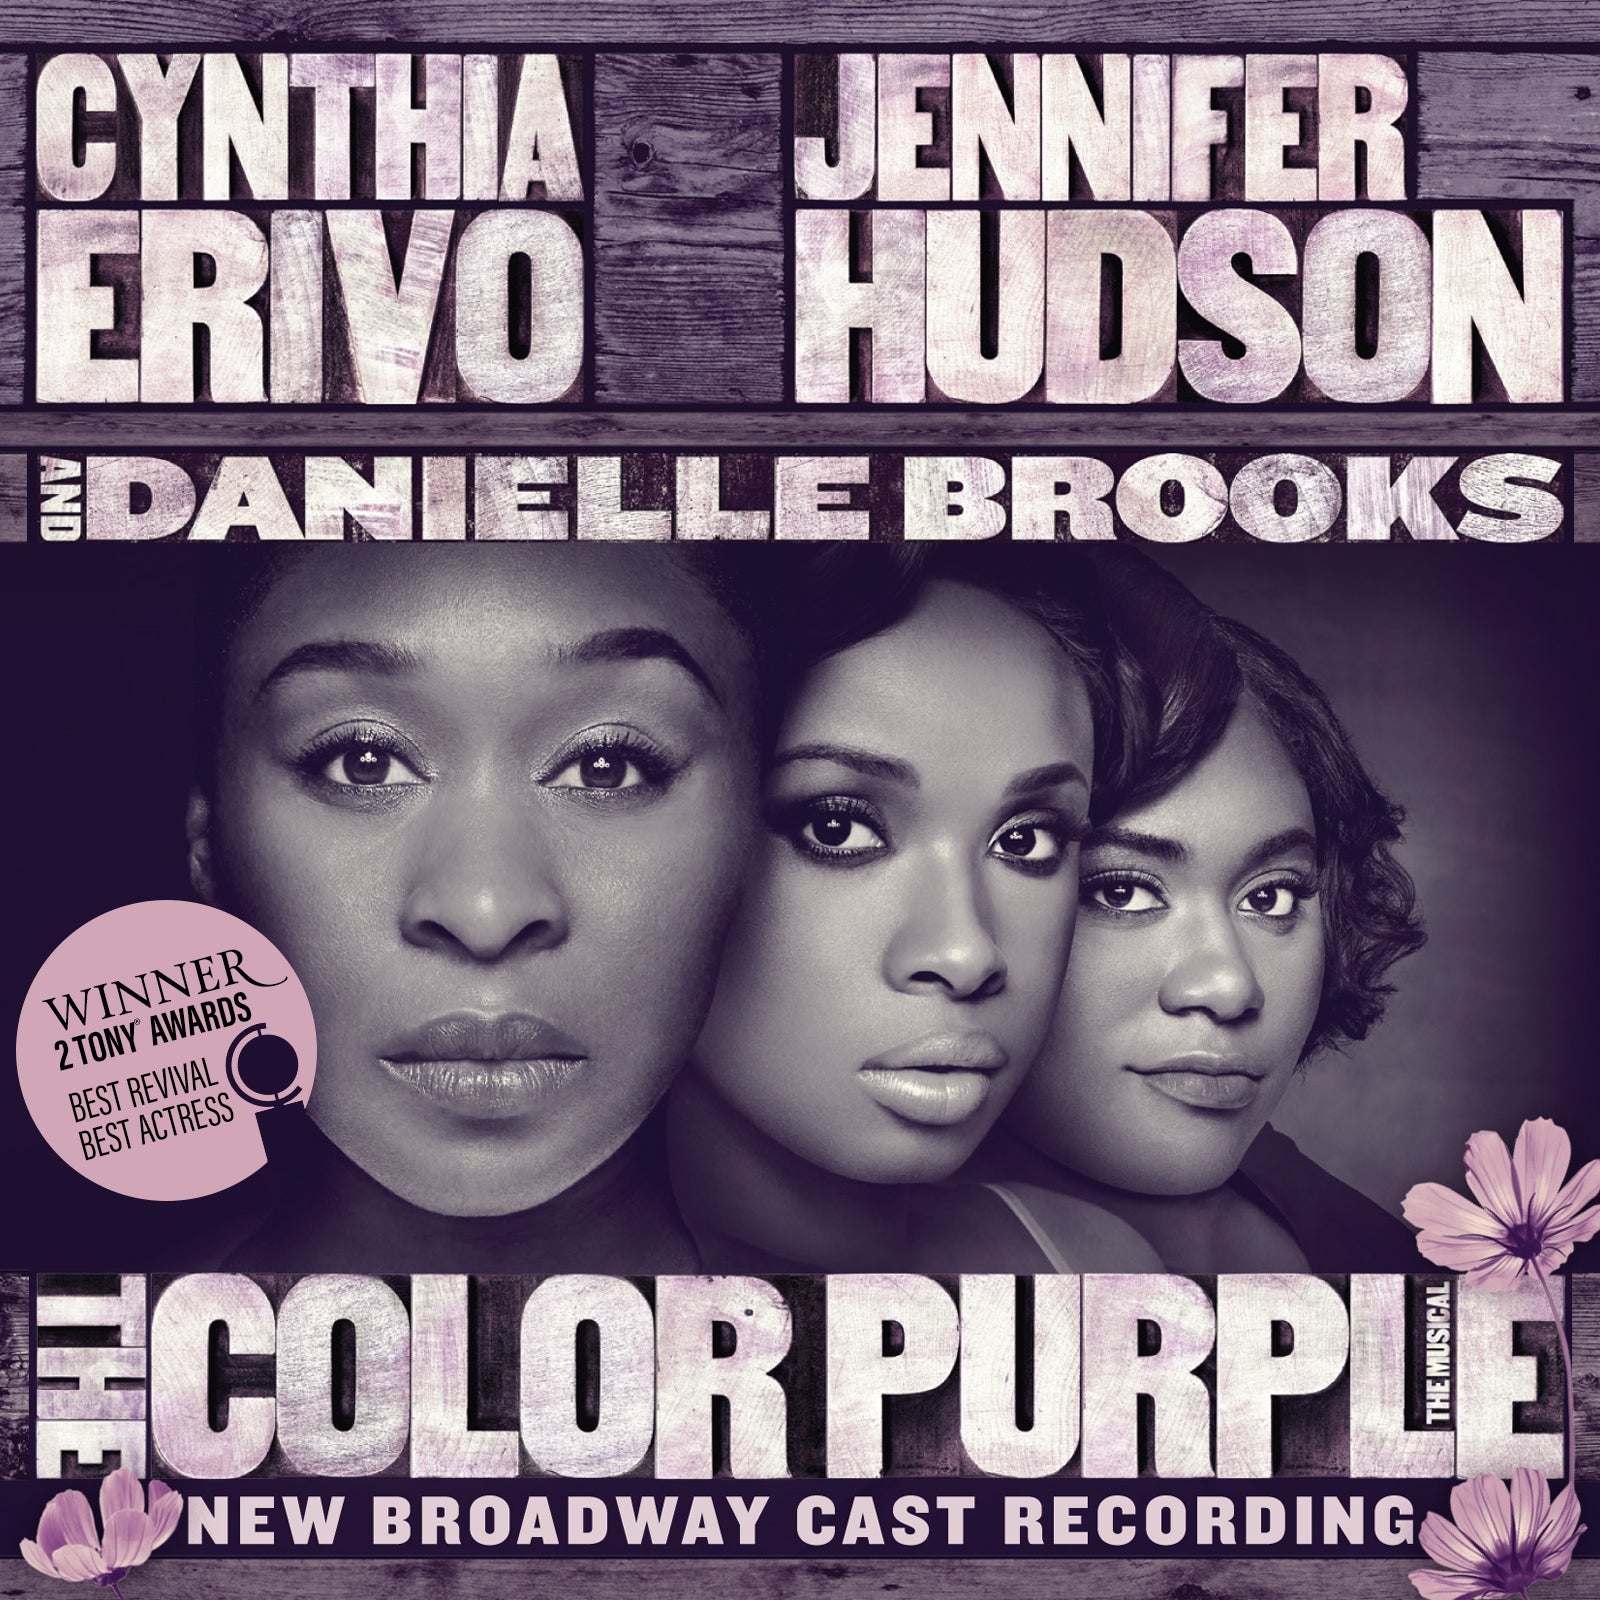 The Color Purple (New Broadway Cast Recording) [CD]